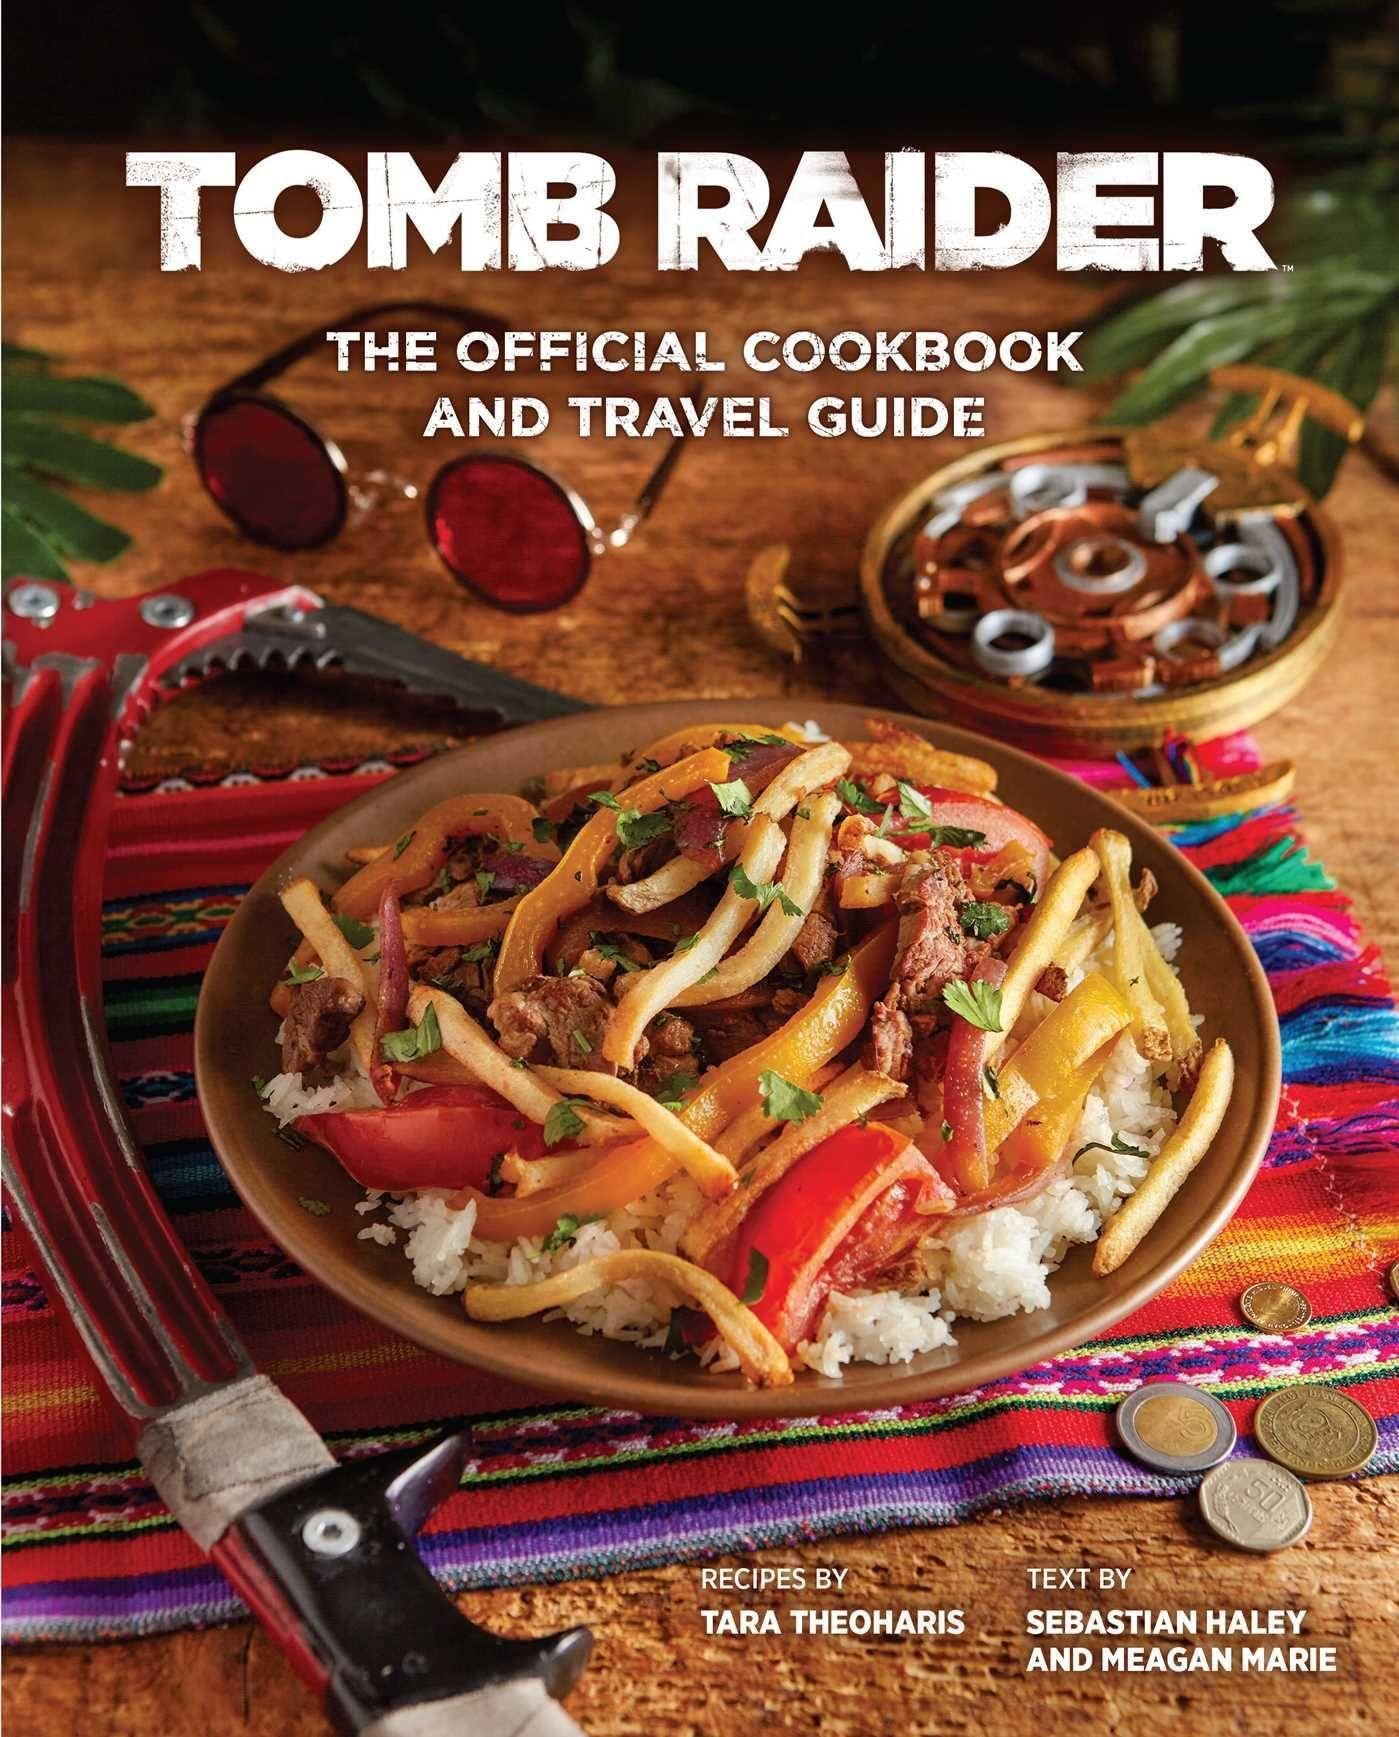 Tomb Raider: The Official Cookbook and Travel Guide (Hardcover) $15.25 + Free Shipping w/ Prime or on Orders $25+